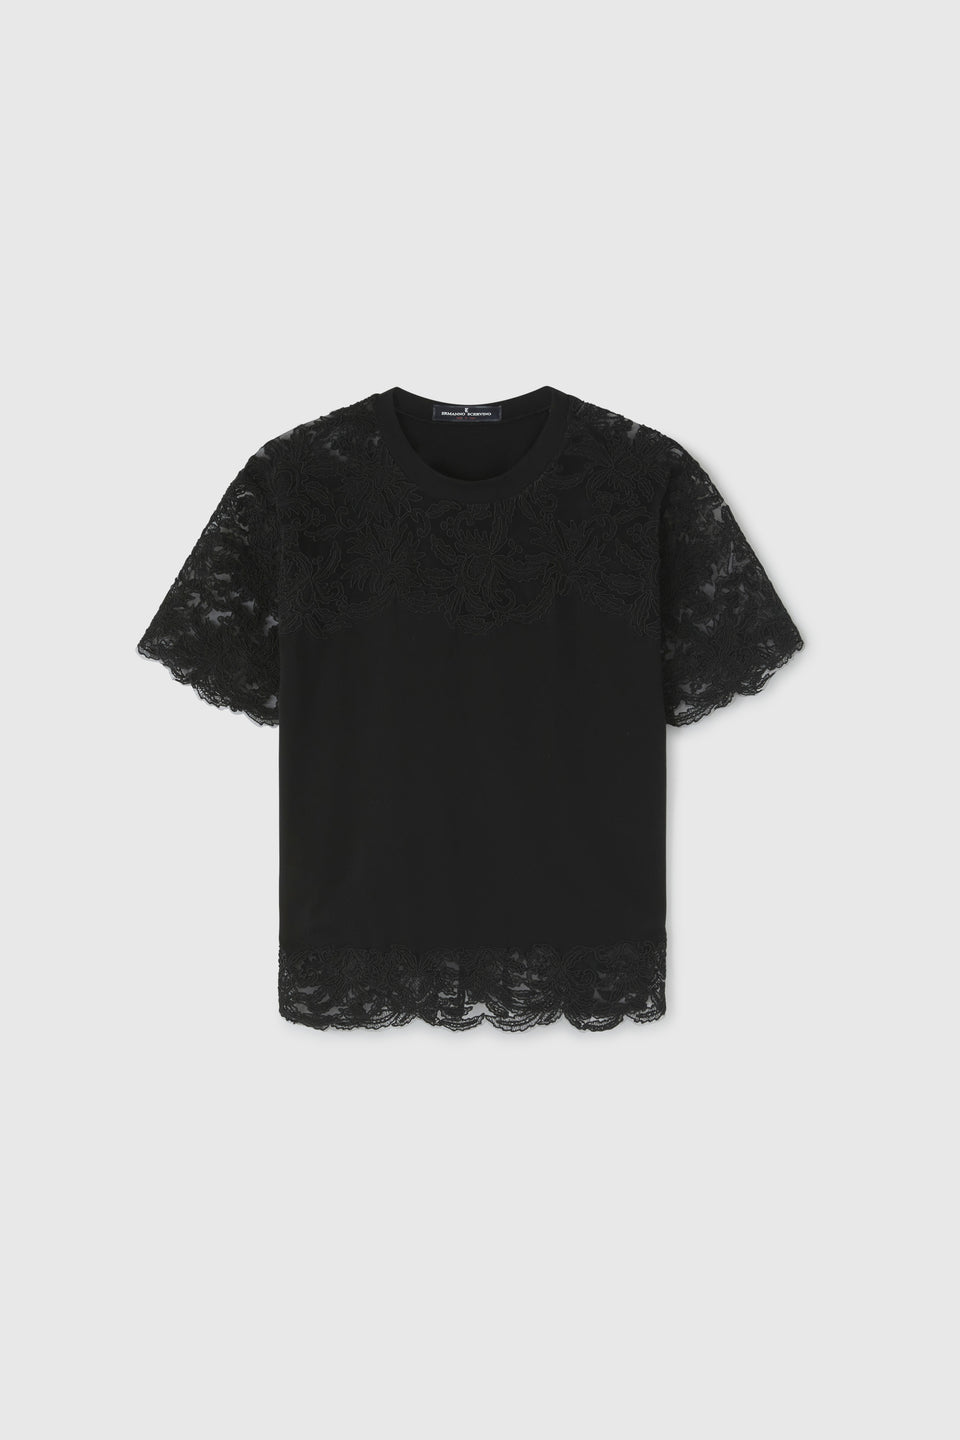 Black cotton and lace T-shirt